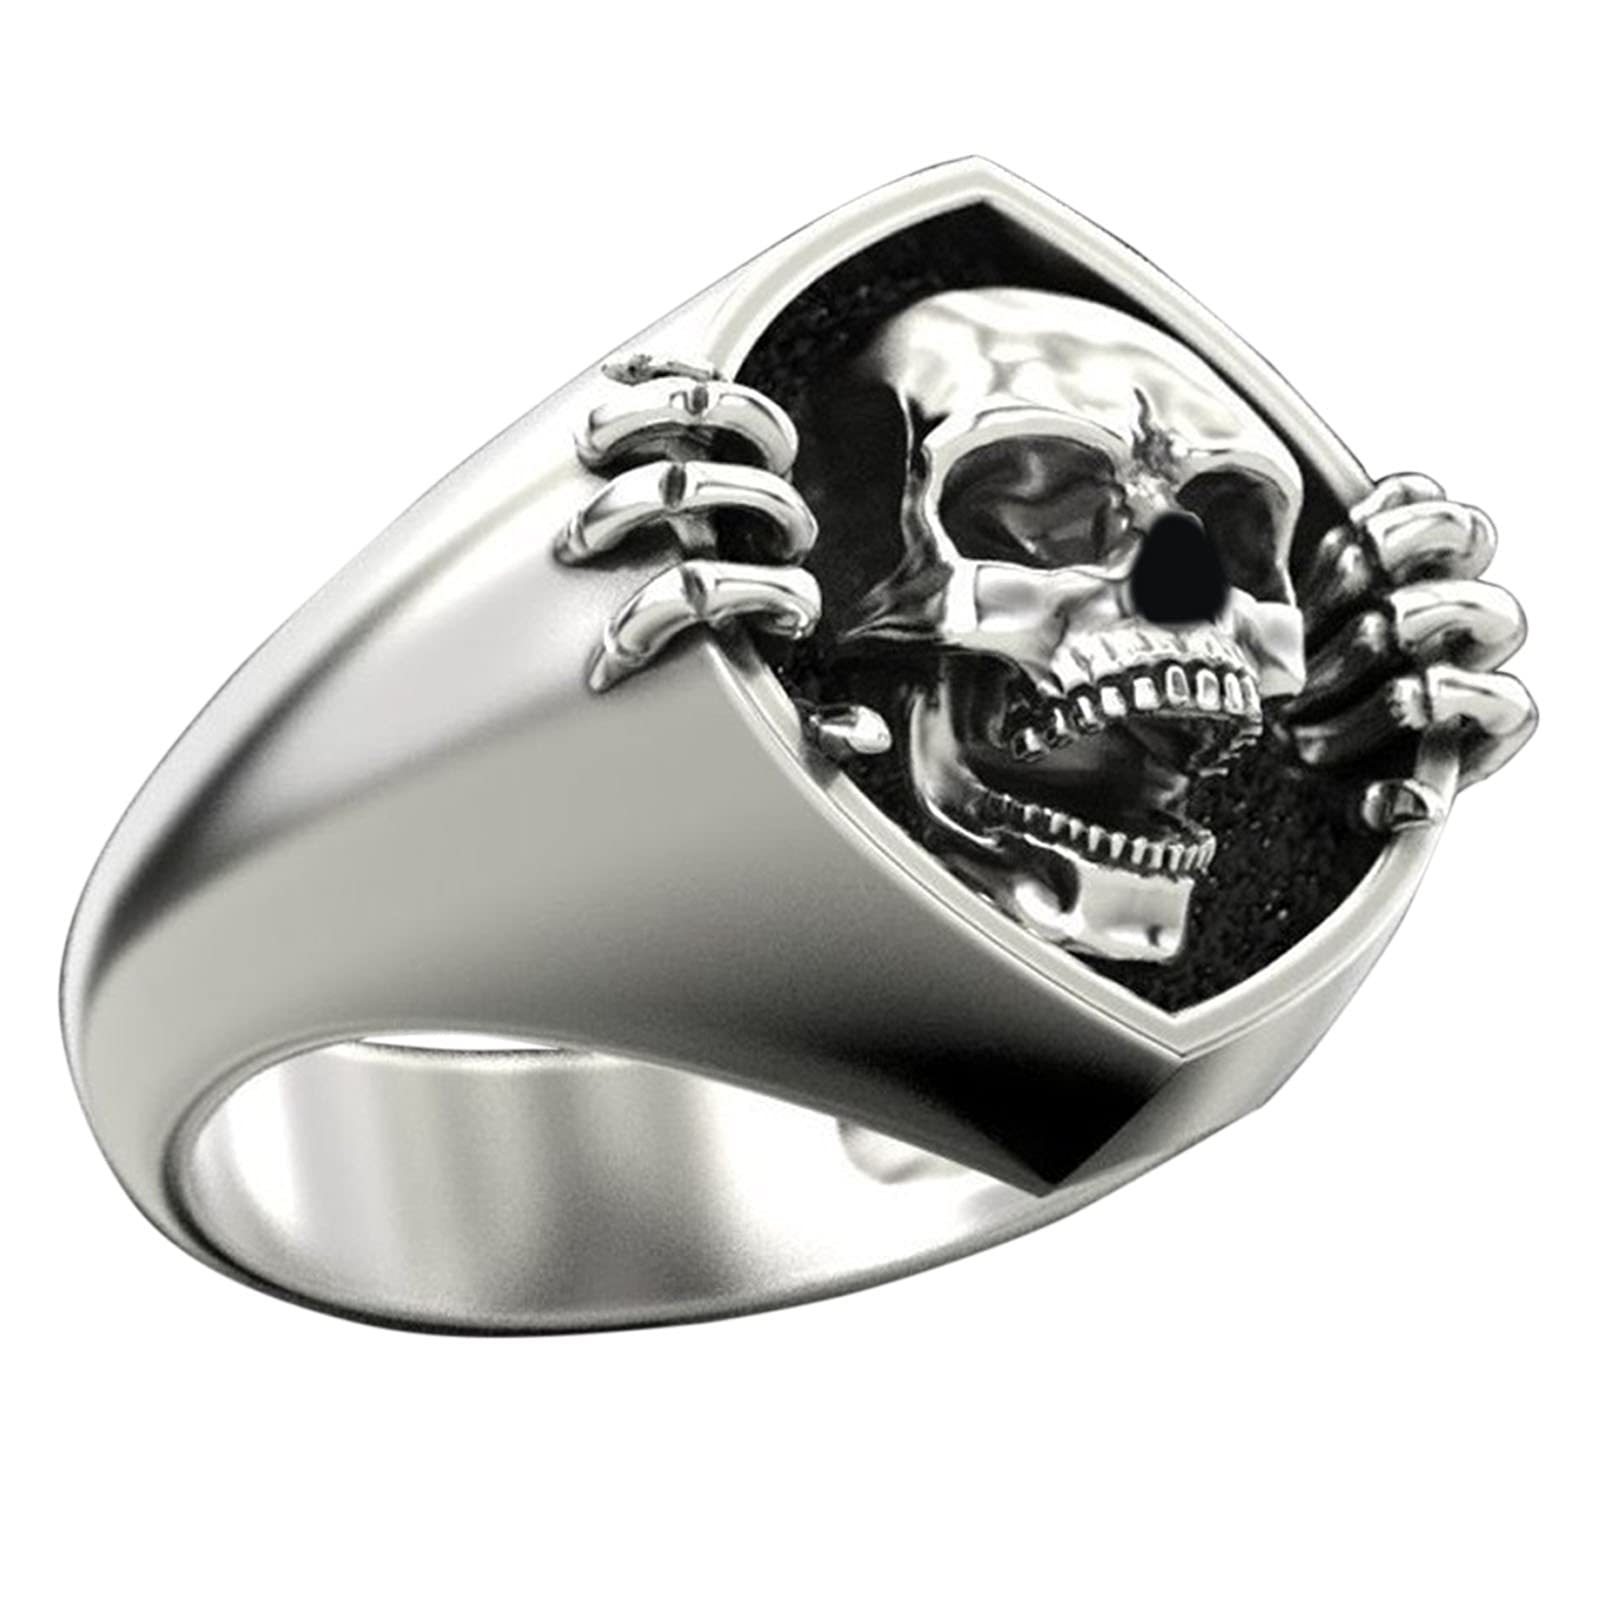 Skull Ring Vintage Men's Finger Ring Geometric Ring Jewelry Women‘s Gothic Punk Hip Hop Biker Personalized Birthstone Engagement Wedding Bands Ring Fit Size 7-12 (A, 8)